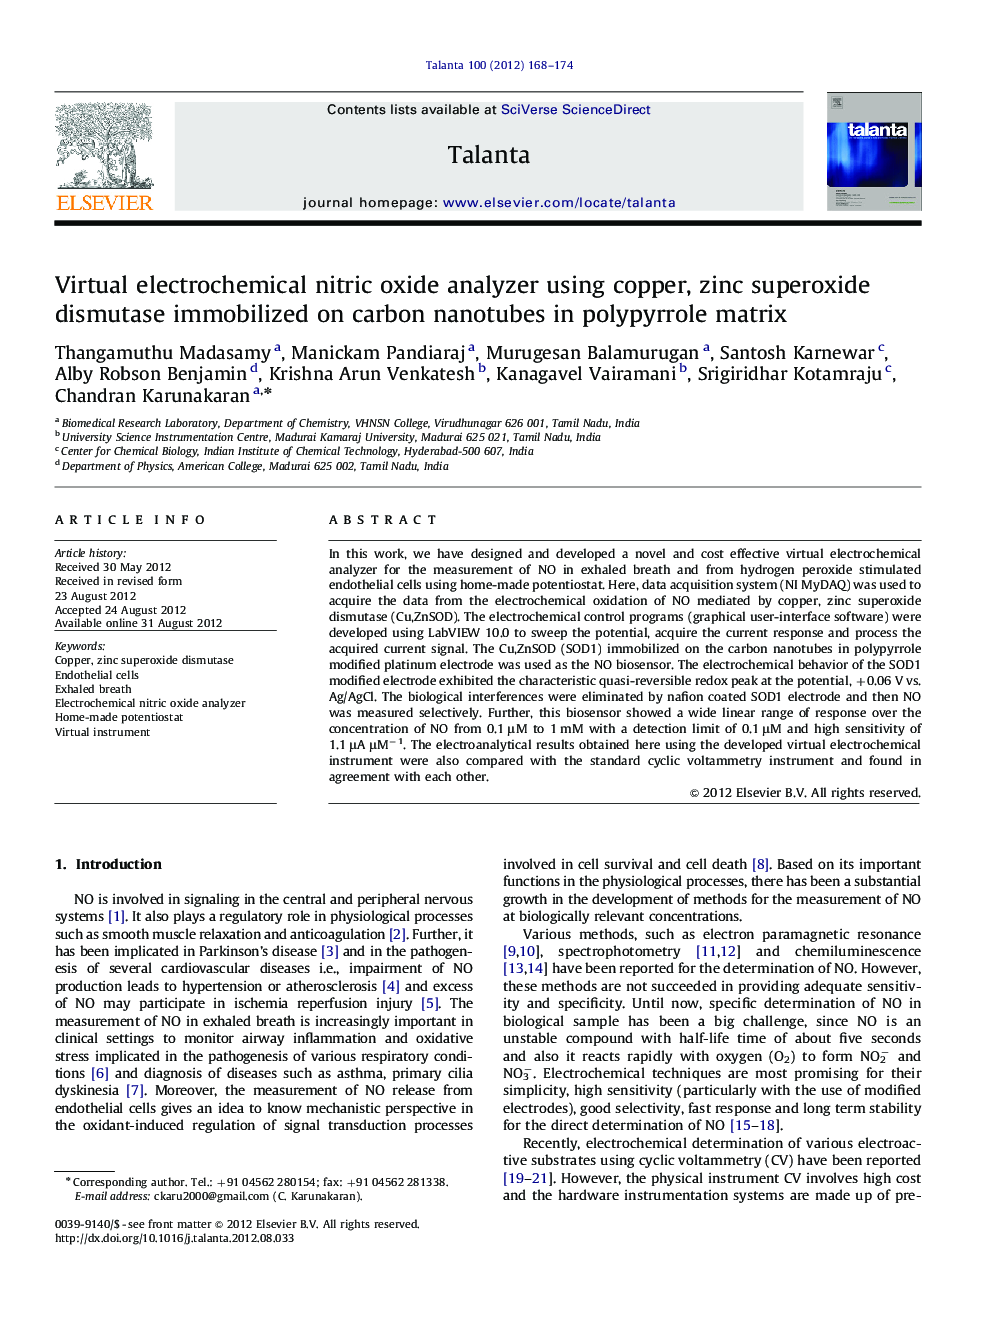 Virtual electrochemical nitric oxide analyzer using copper, zinc superoxide dismutase immobilized on carbon nanotubes in polypyrrole matrix